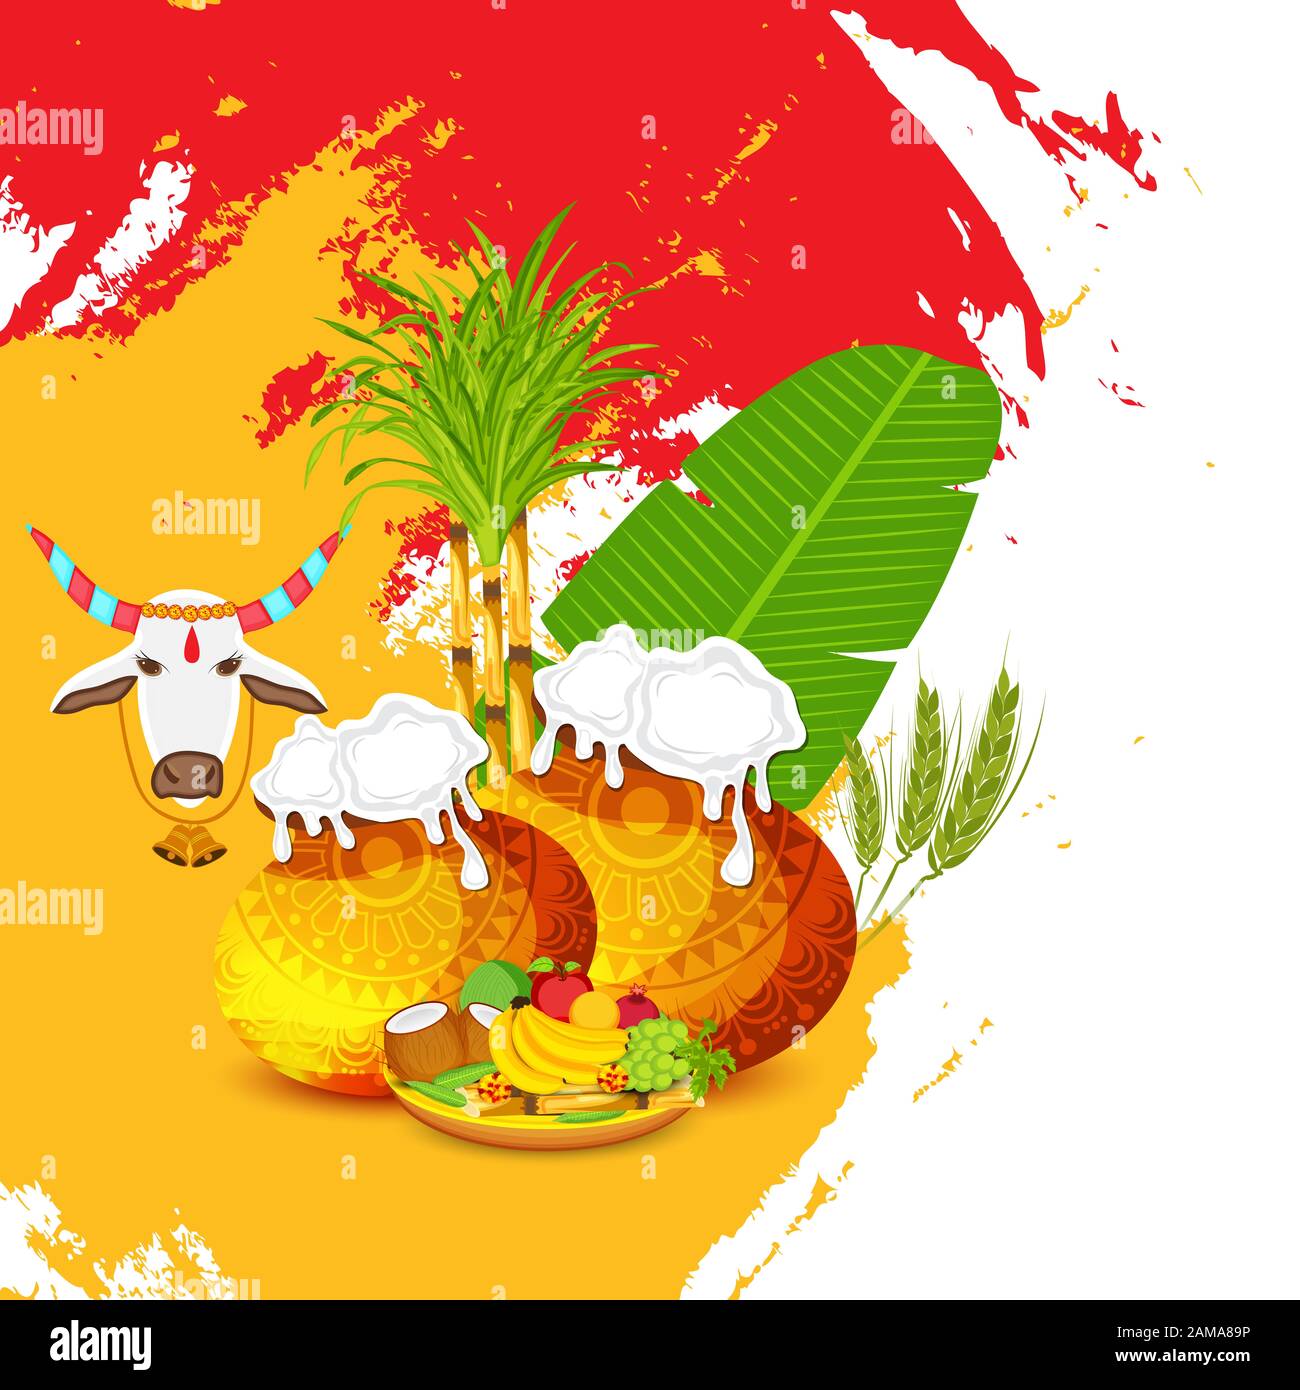 Vector illustration of a Background for Happy Pongal Holiday Harvest  Festival of Tamil Nadu South India Stock Photo - Alamy